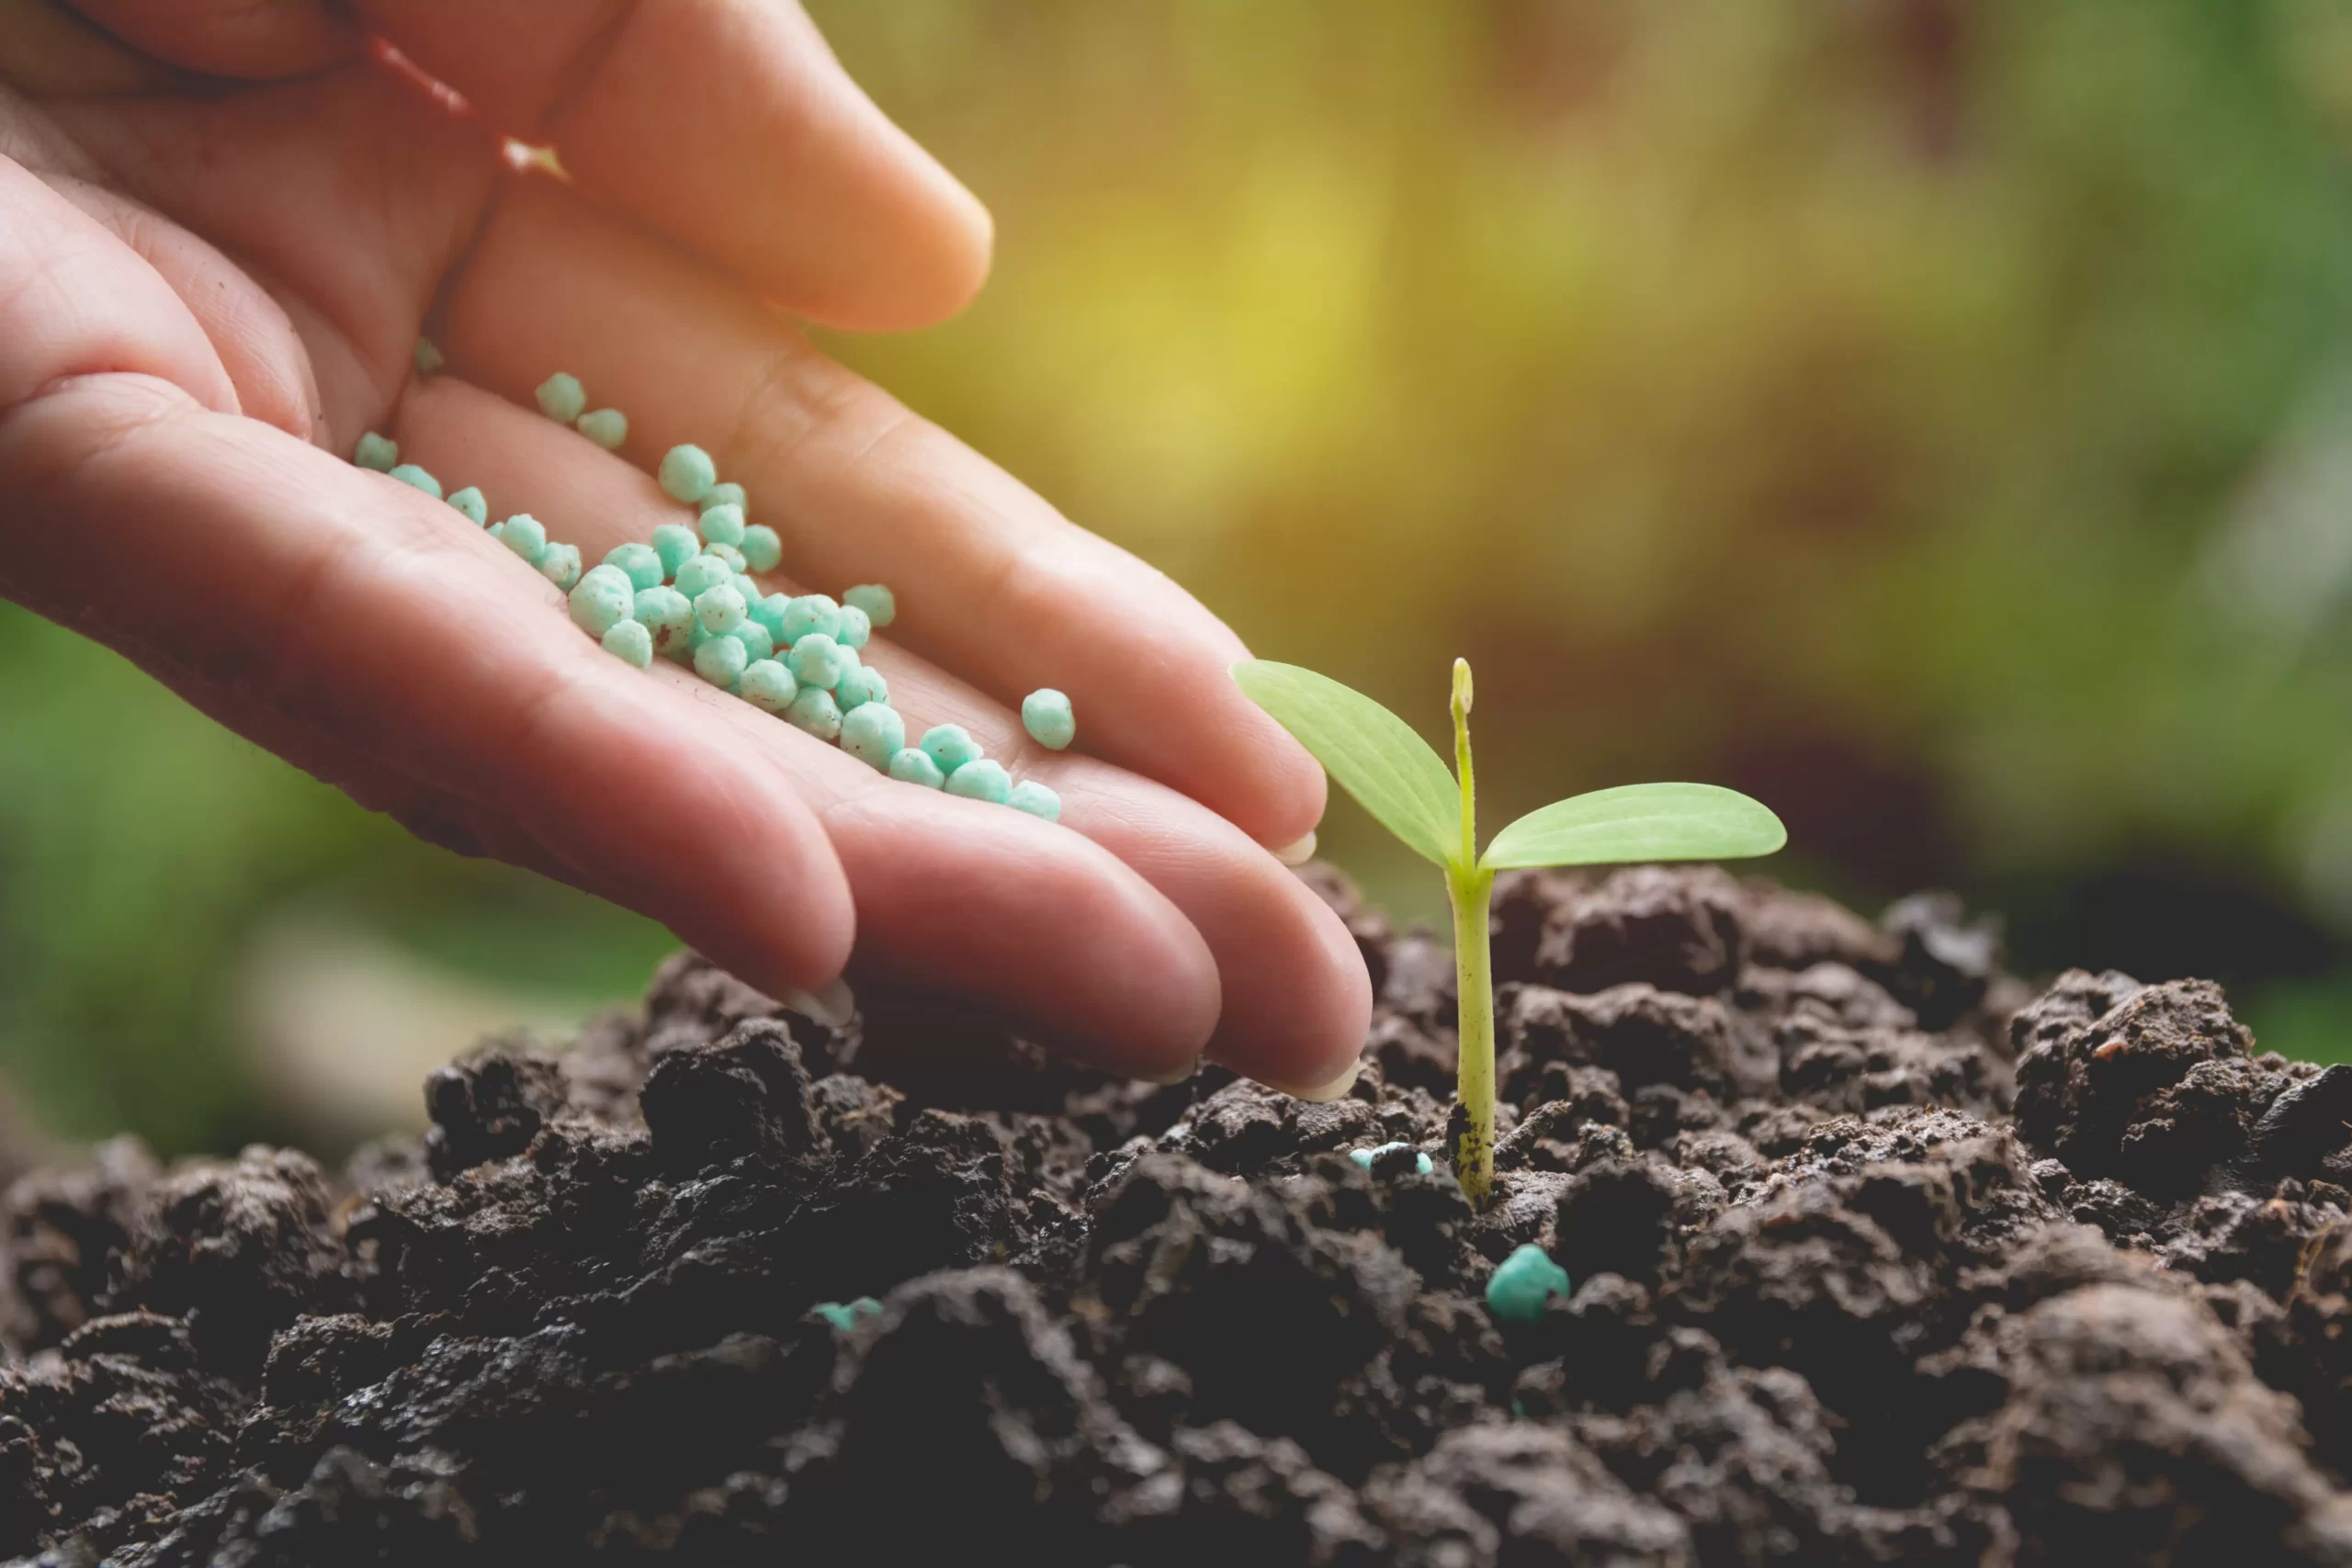 Global Organic Fertilizer Market Is Estimated To Witness High Growth Owing To Growing Demand for Chemical-Free Food Products